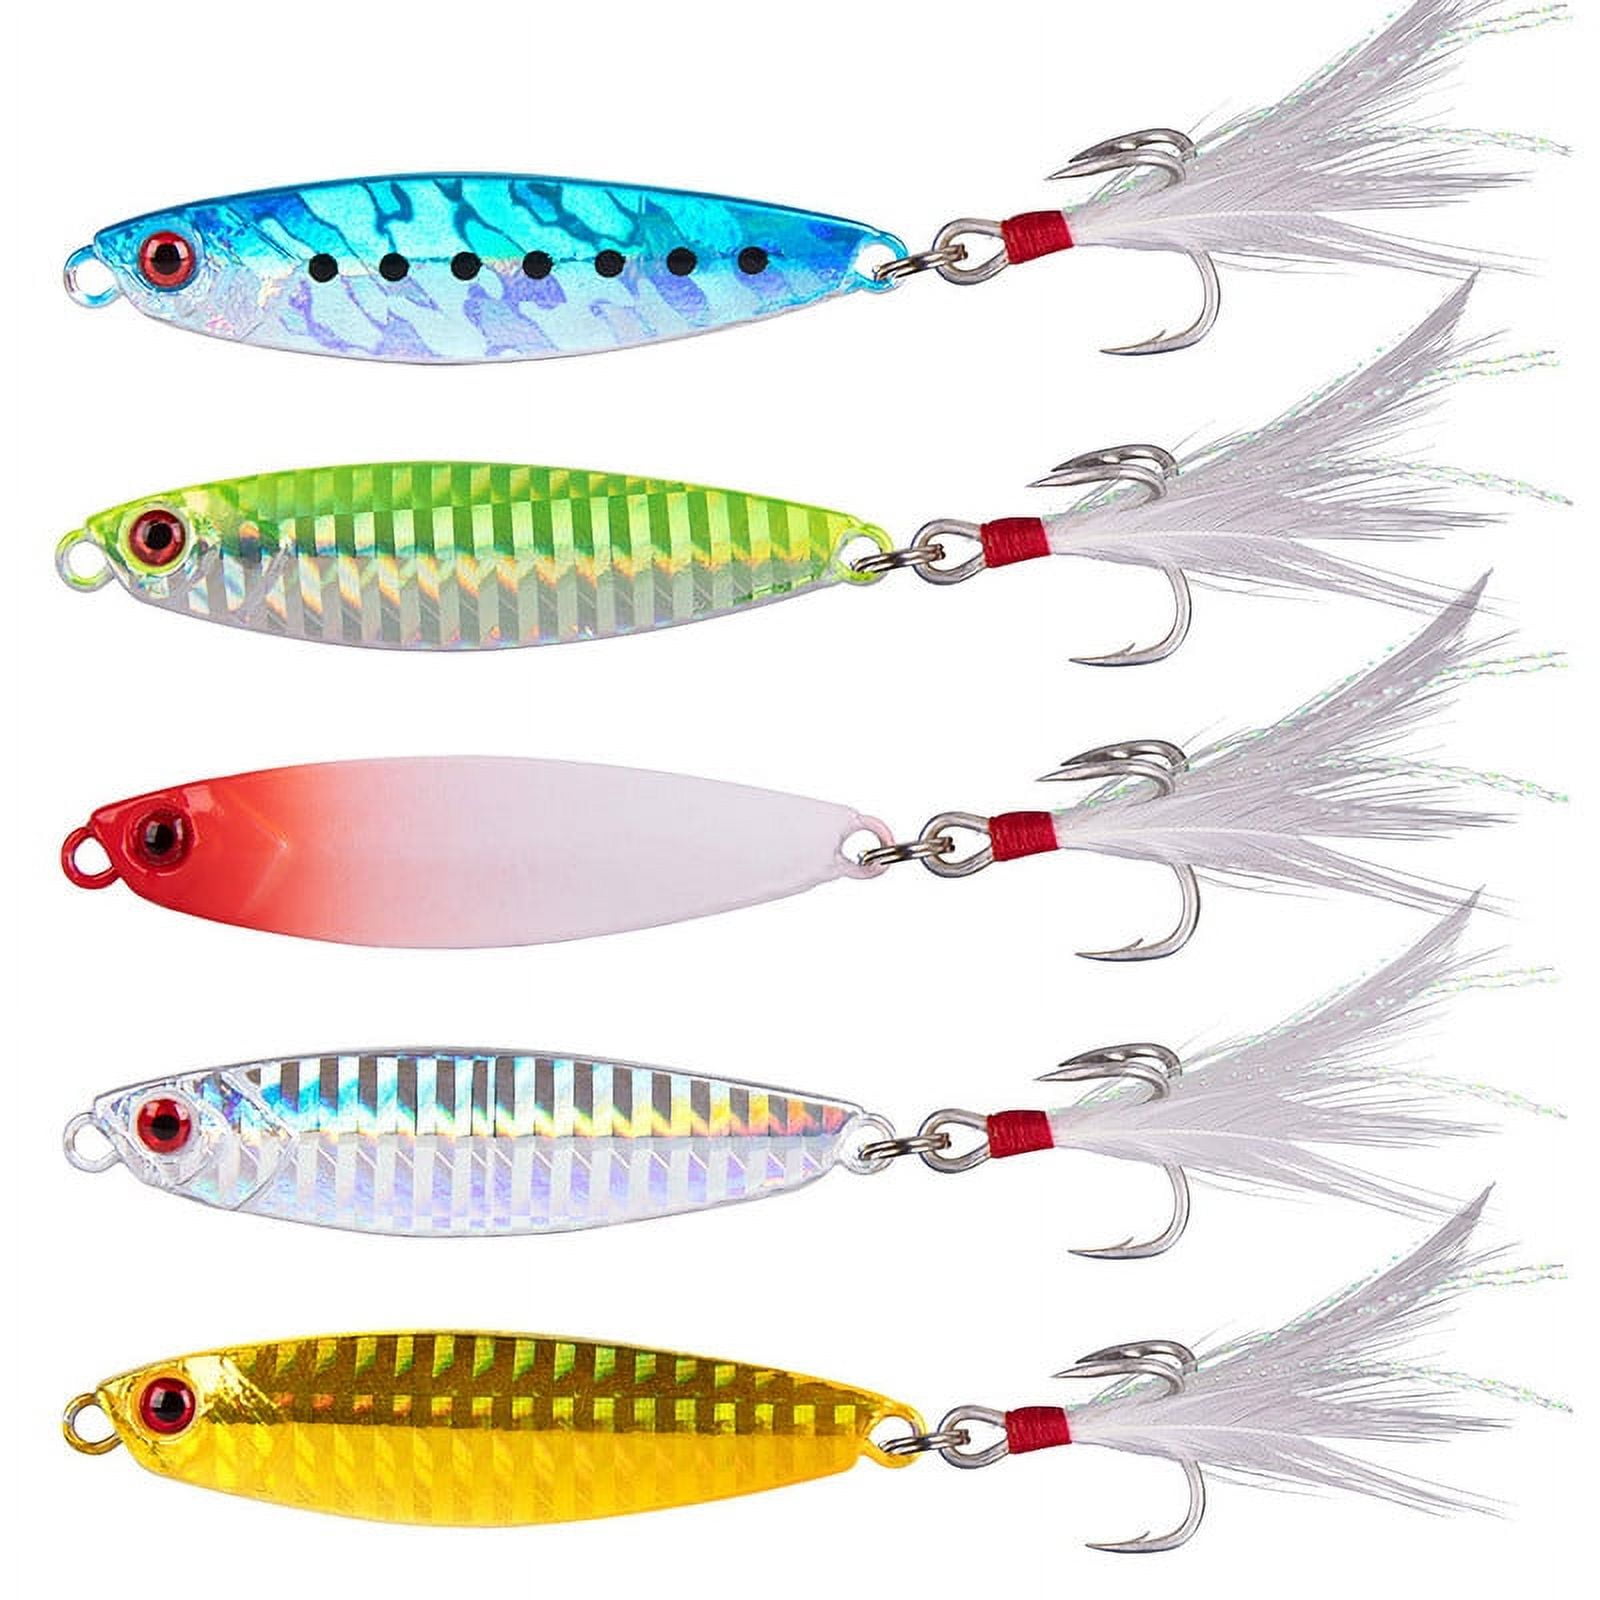 Dr.Fish Jigs Fishing Lures spoon 5 Pack 9/10 oz For Bass Sinking